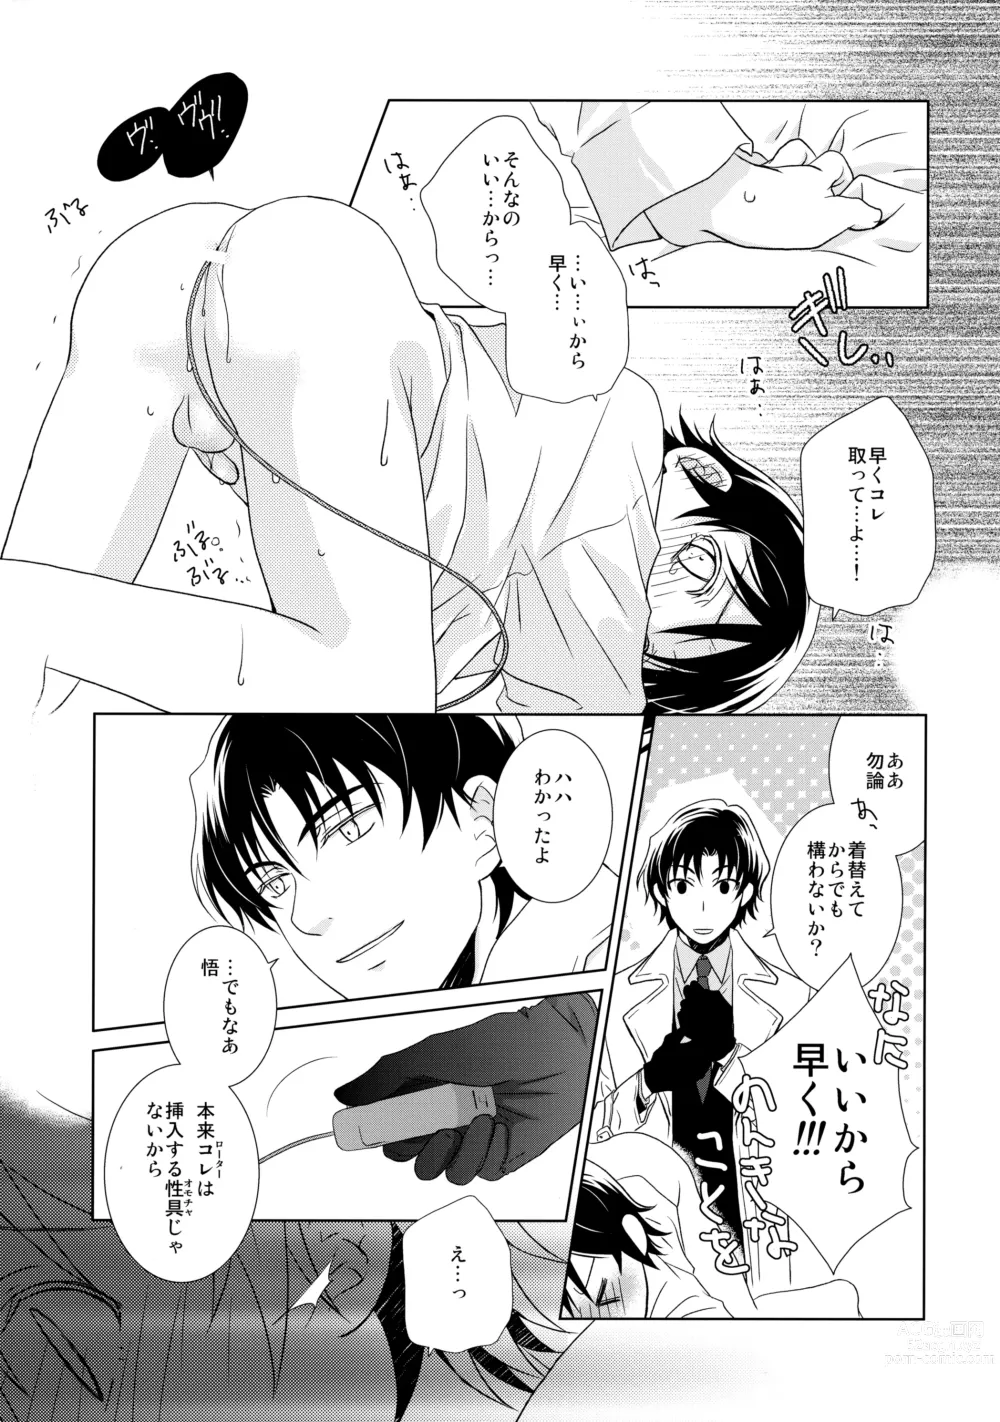 Page 6 of doujinshi Butterfield 8